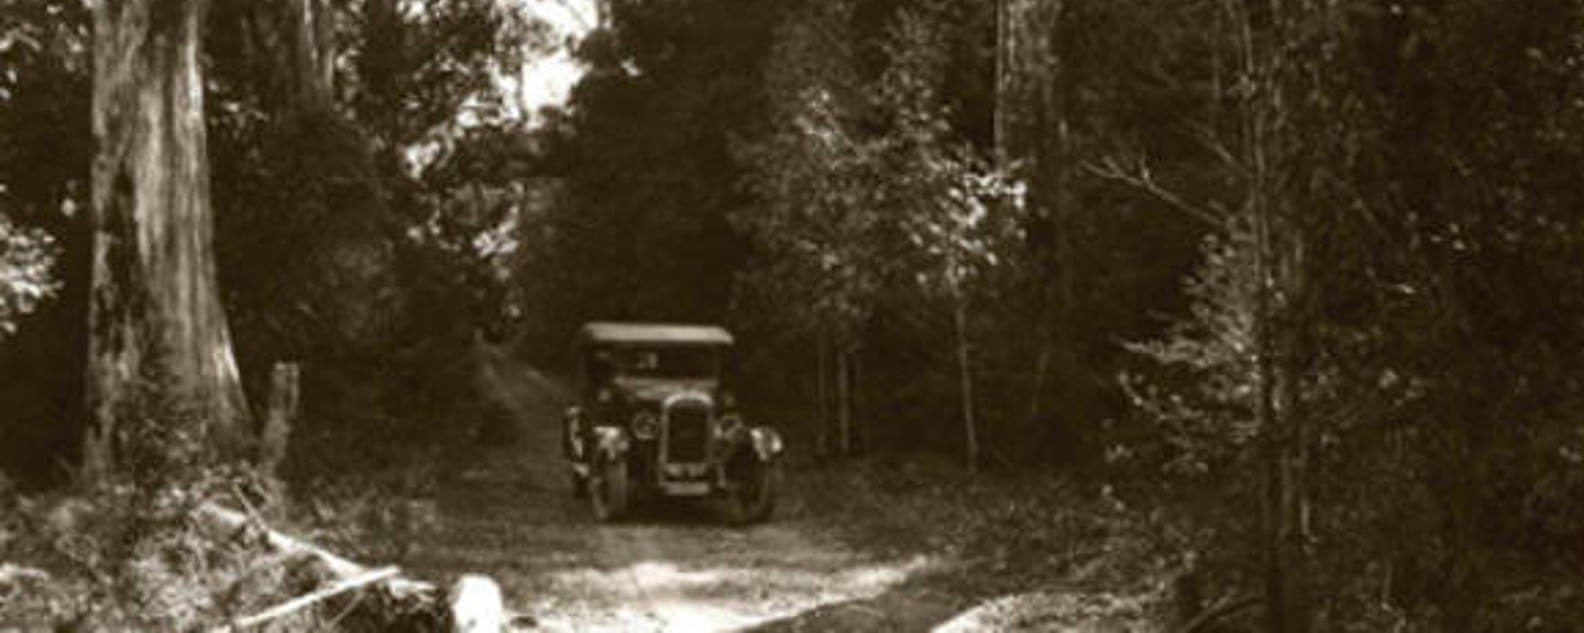 Vehicle in Mount Tomah